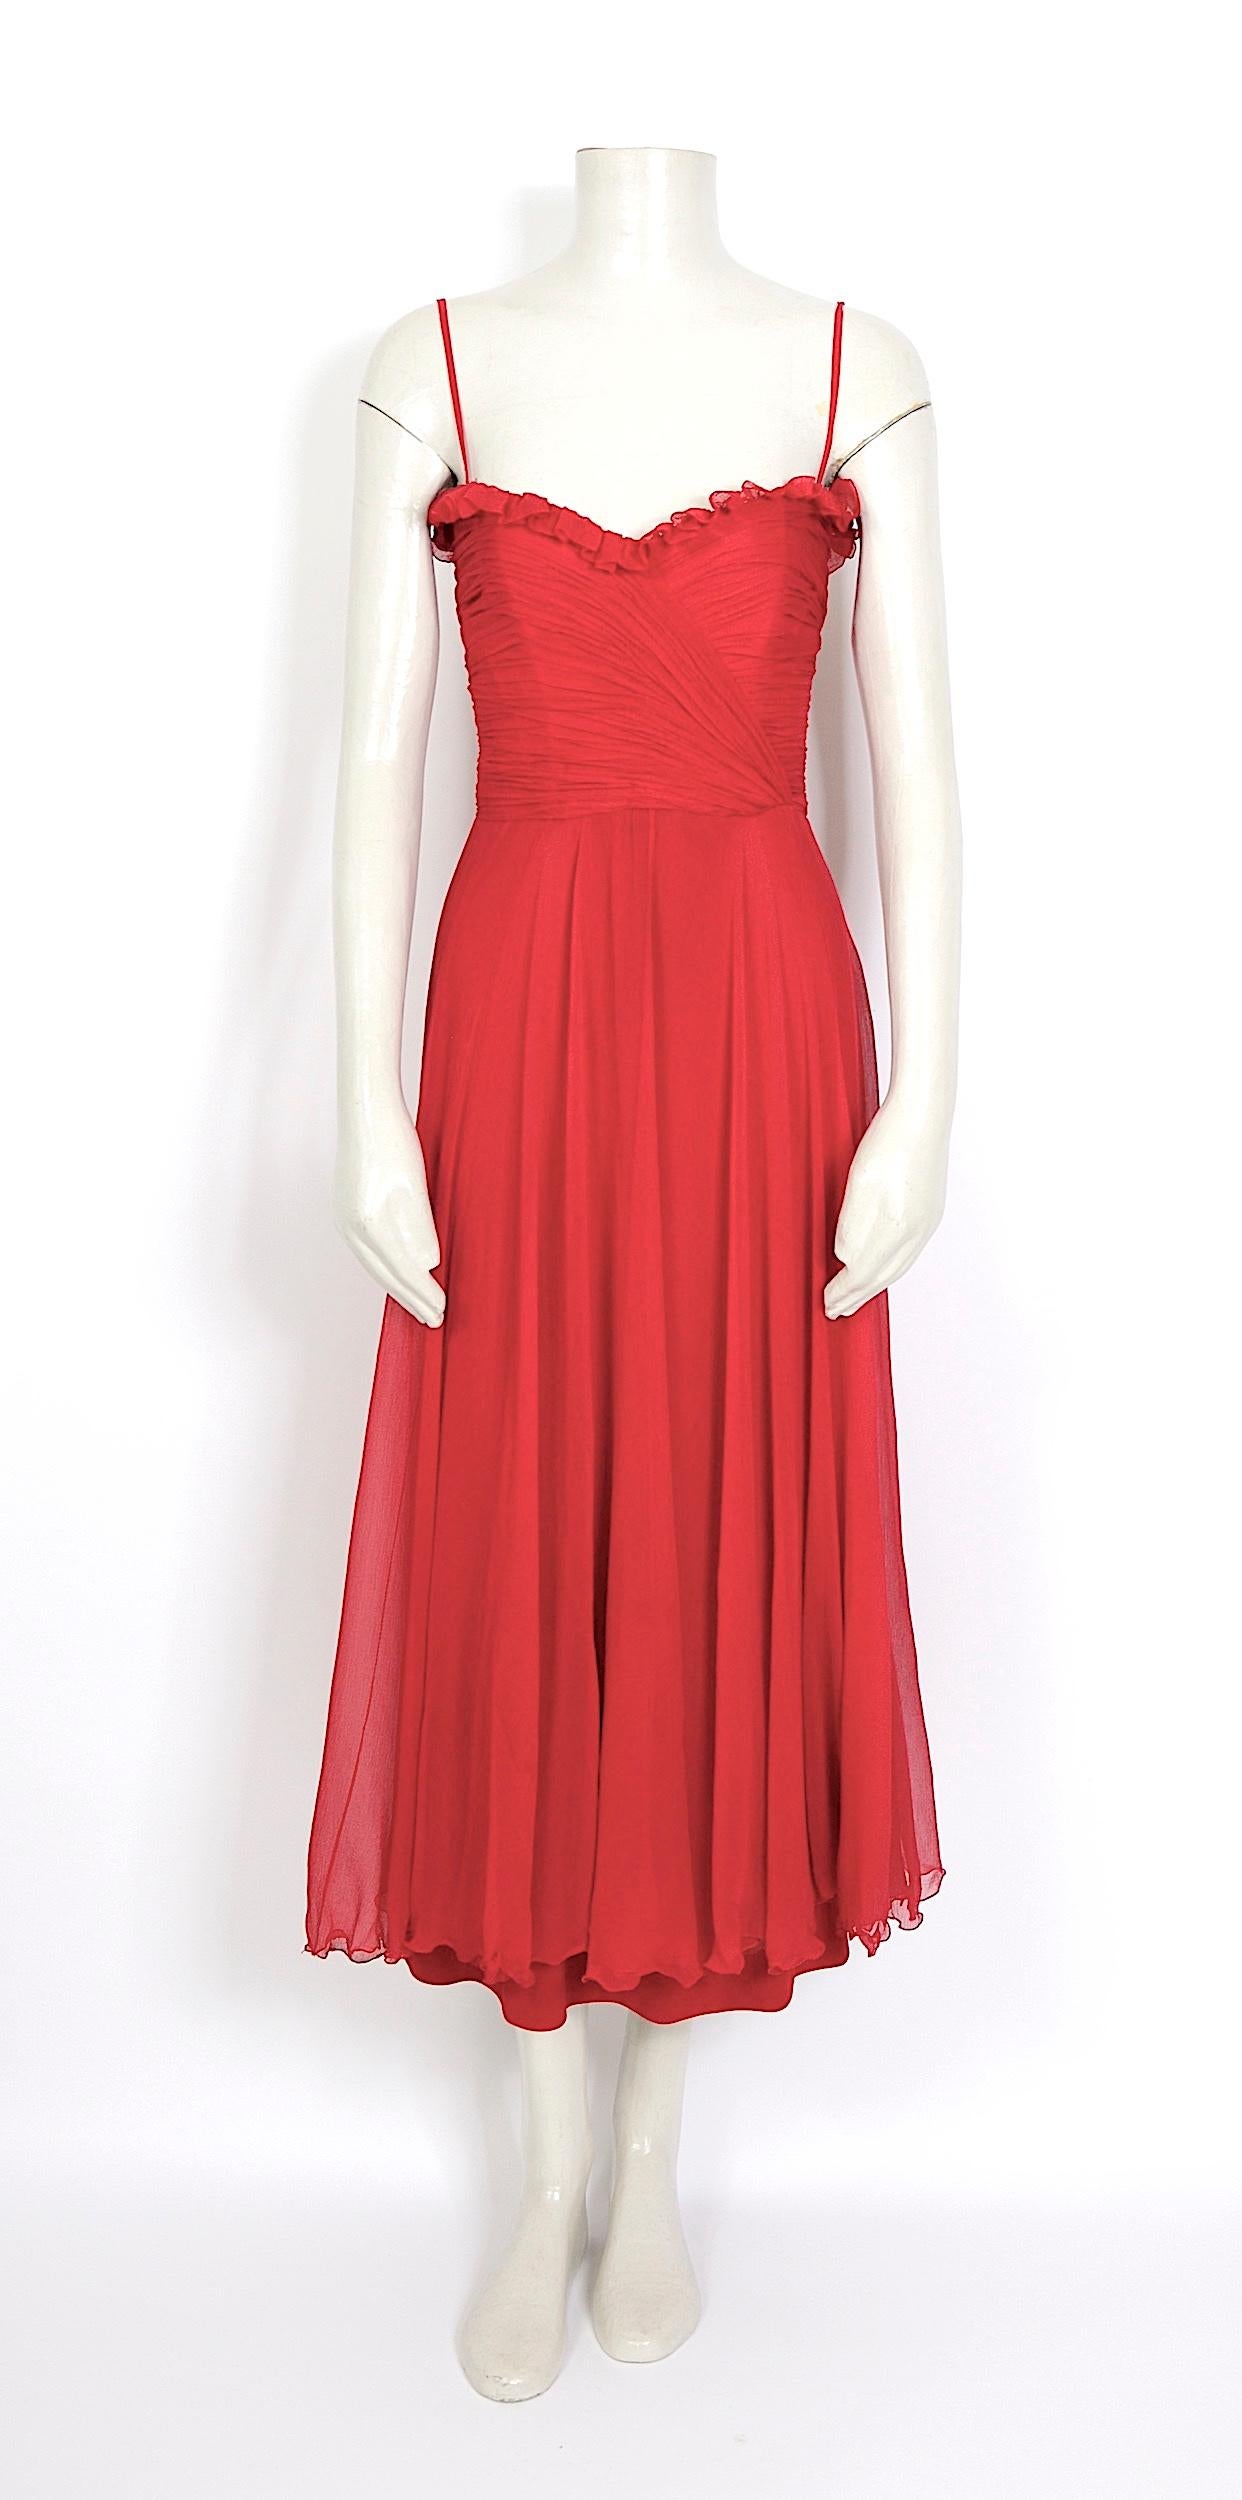 This spectacular vintage 1970s Loris Azzaro evening dress features a boned bustier draped bodice. It closes with the original back zipper. There are delicate shoulders straps attached to the interior of the dress so you would have the option to wear